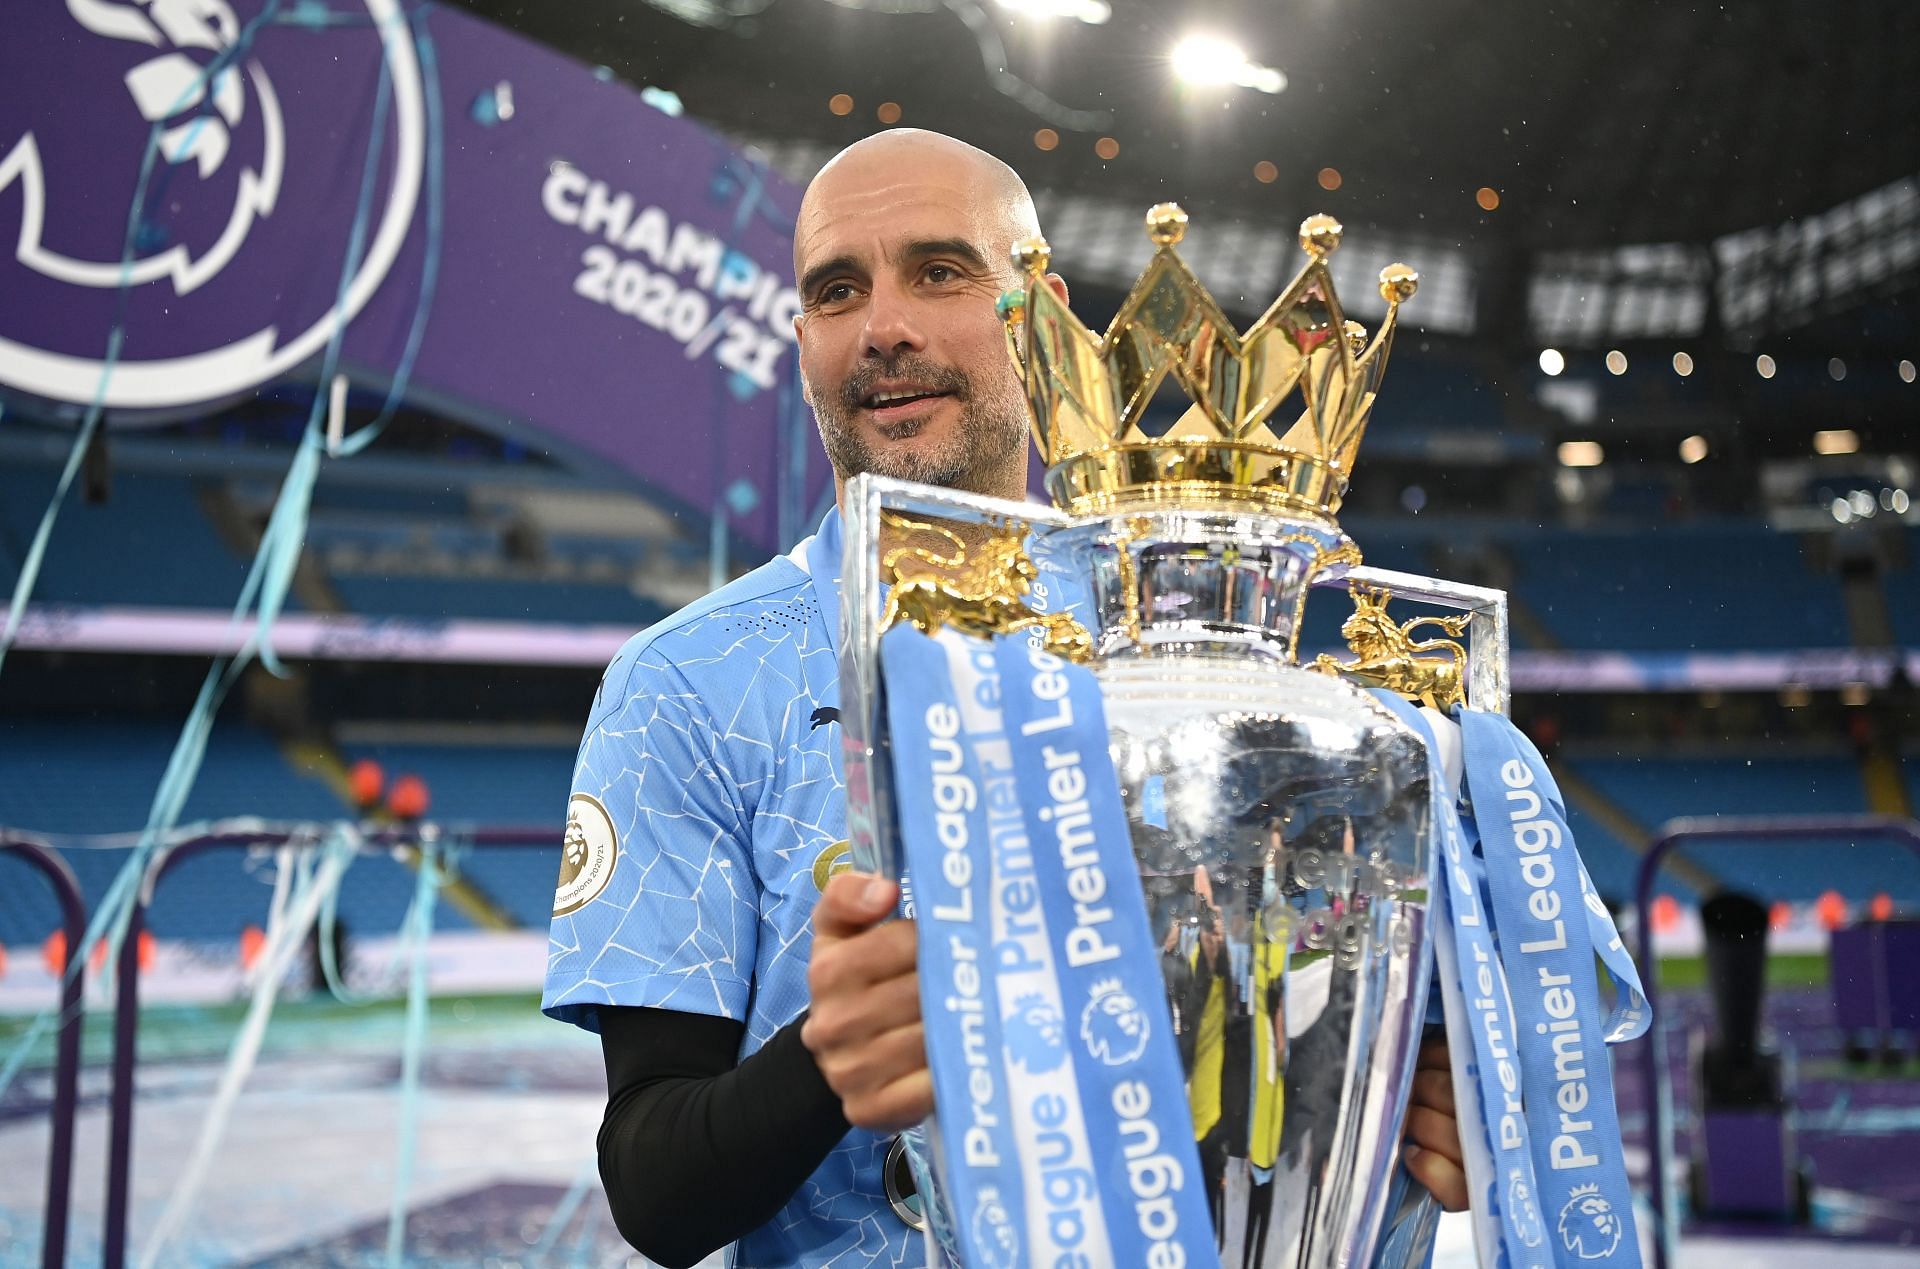 Manchester City will be looking to win their fourth consecutive Premier League